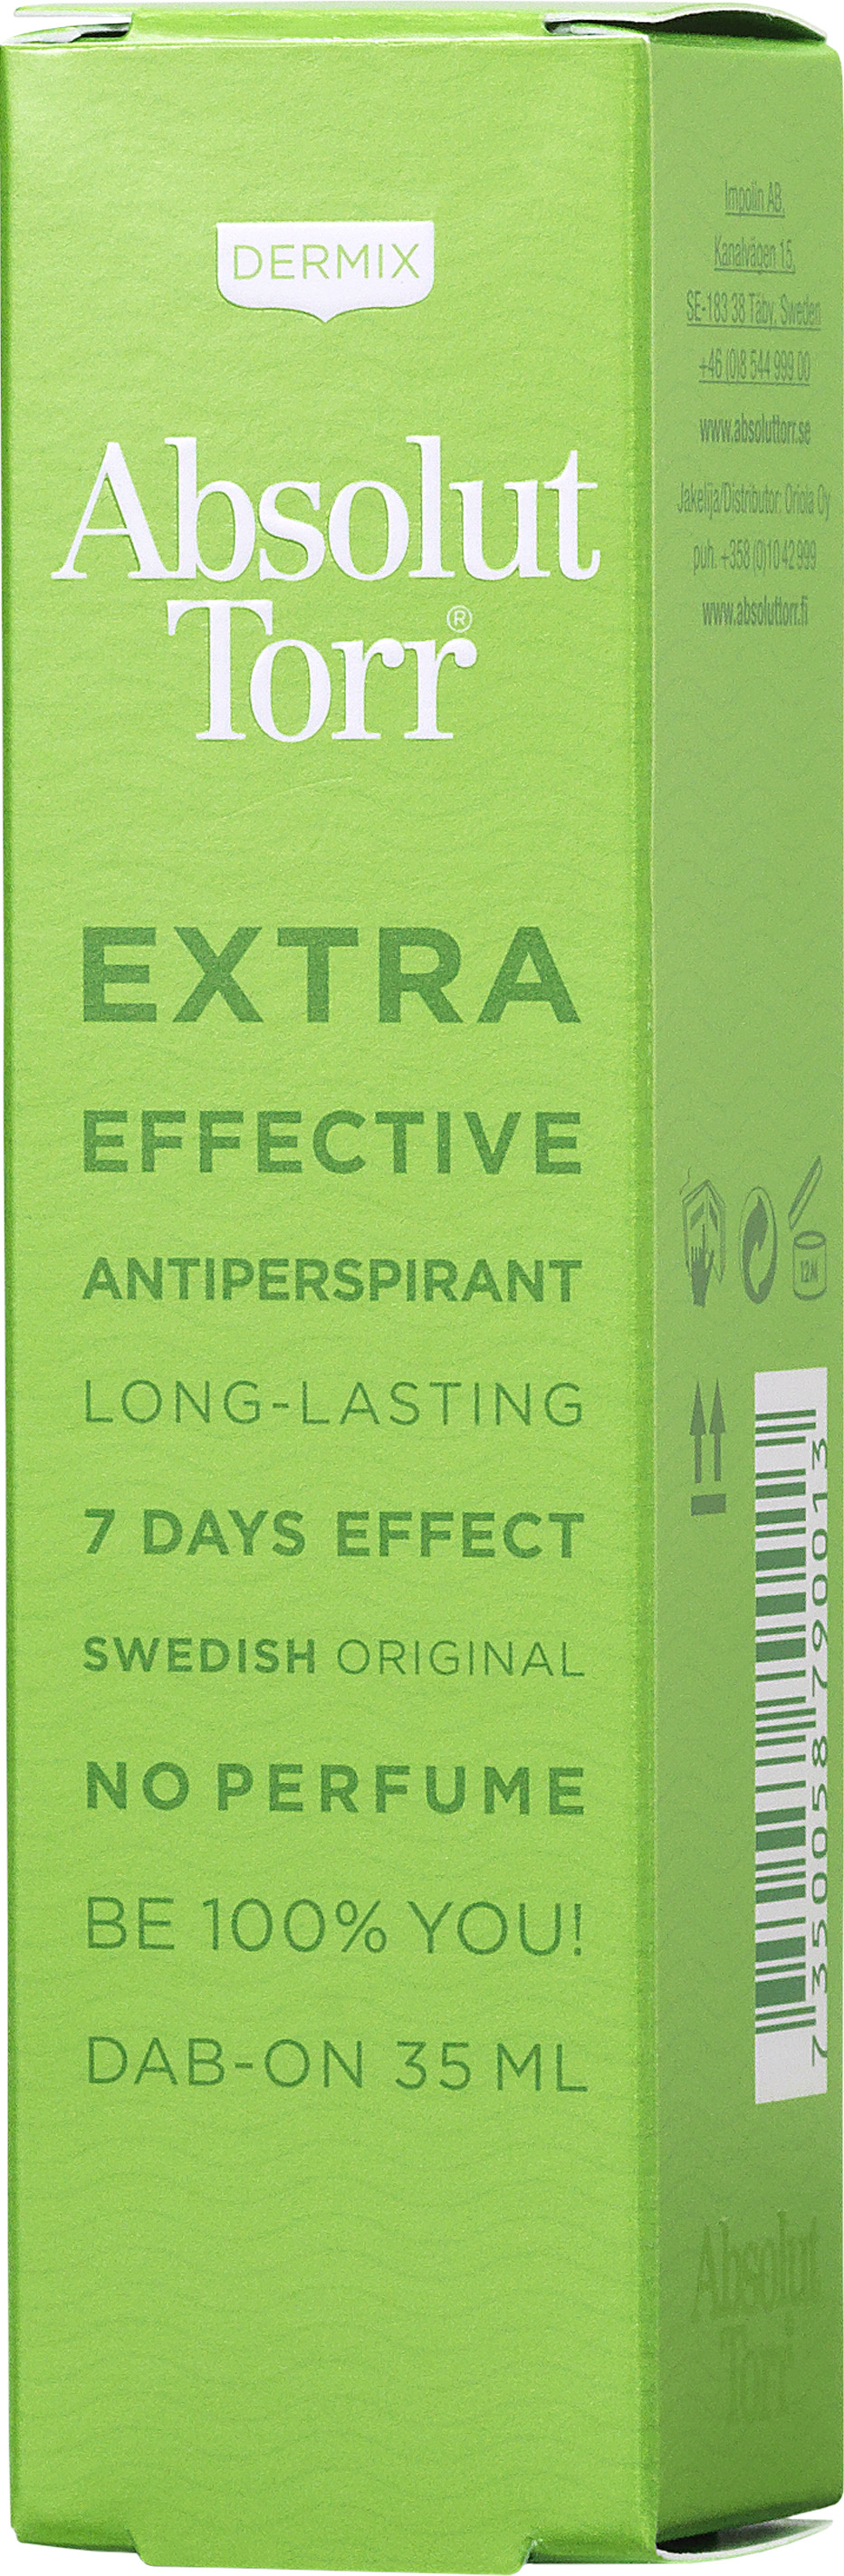 Absolut Torr Extra Effective Antiperspirant Dab-On 35 ml